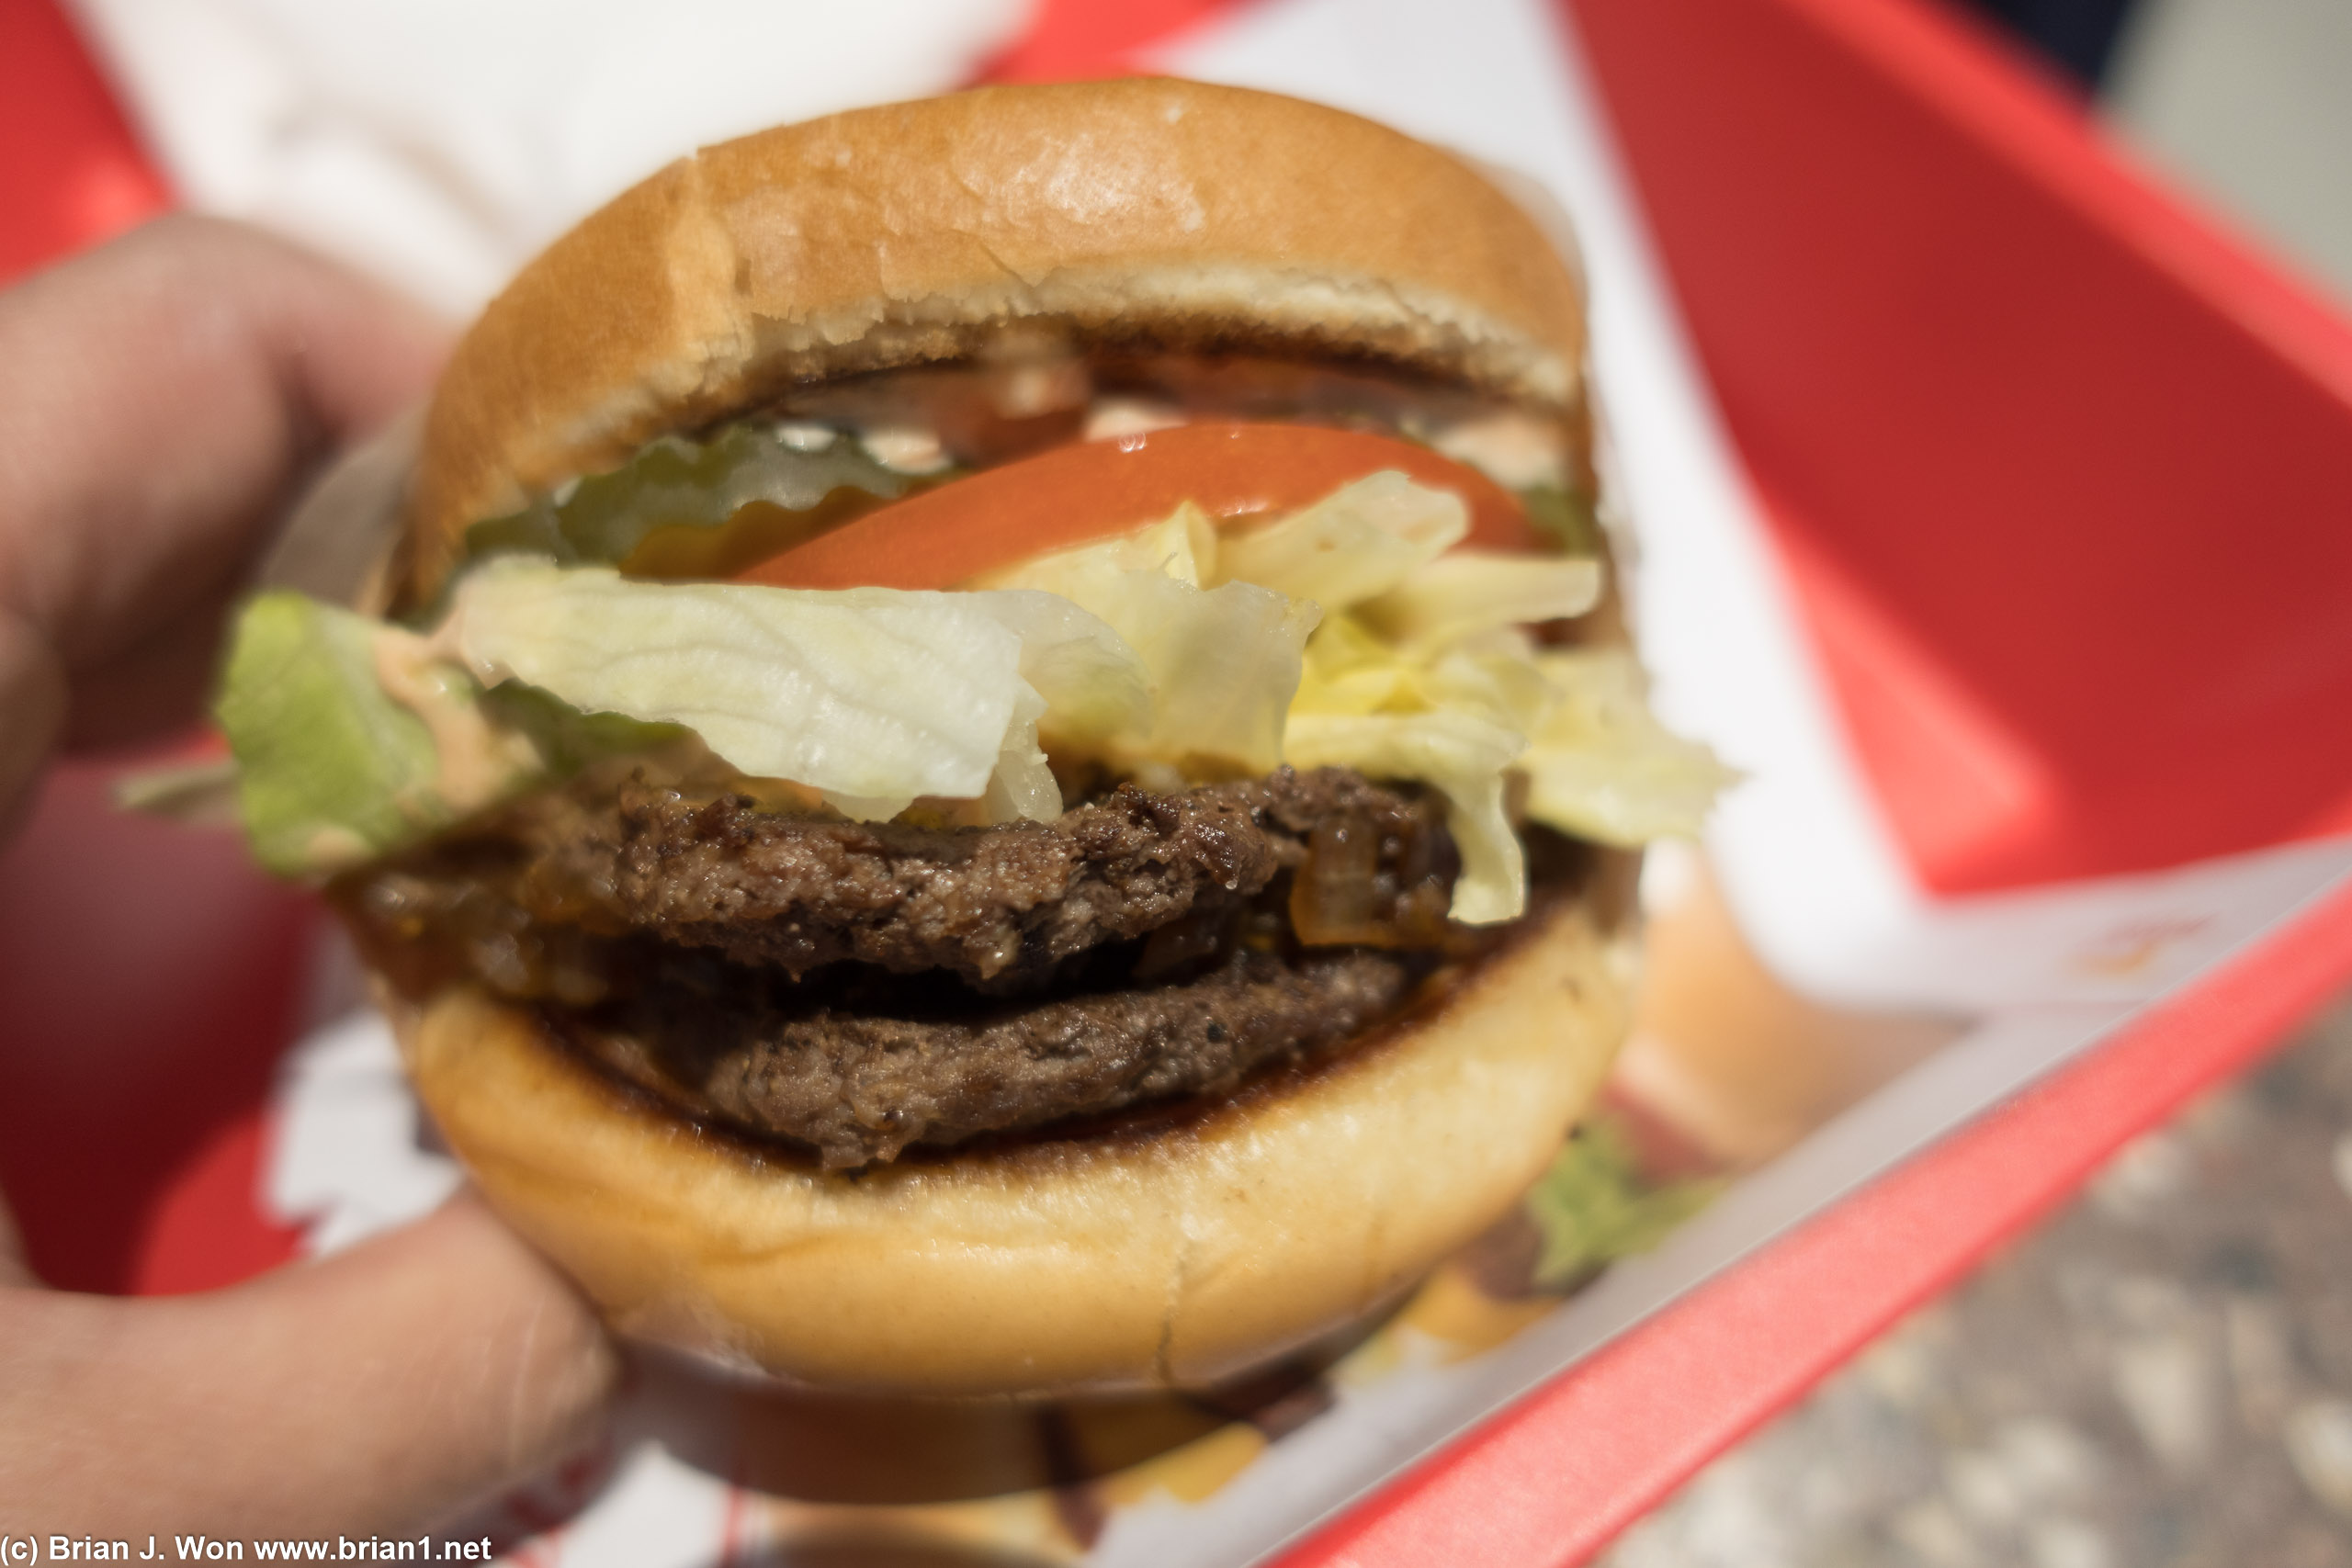 Double meat, animal style.